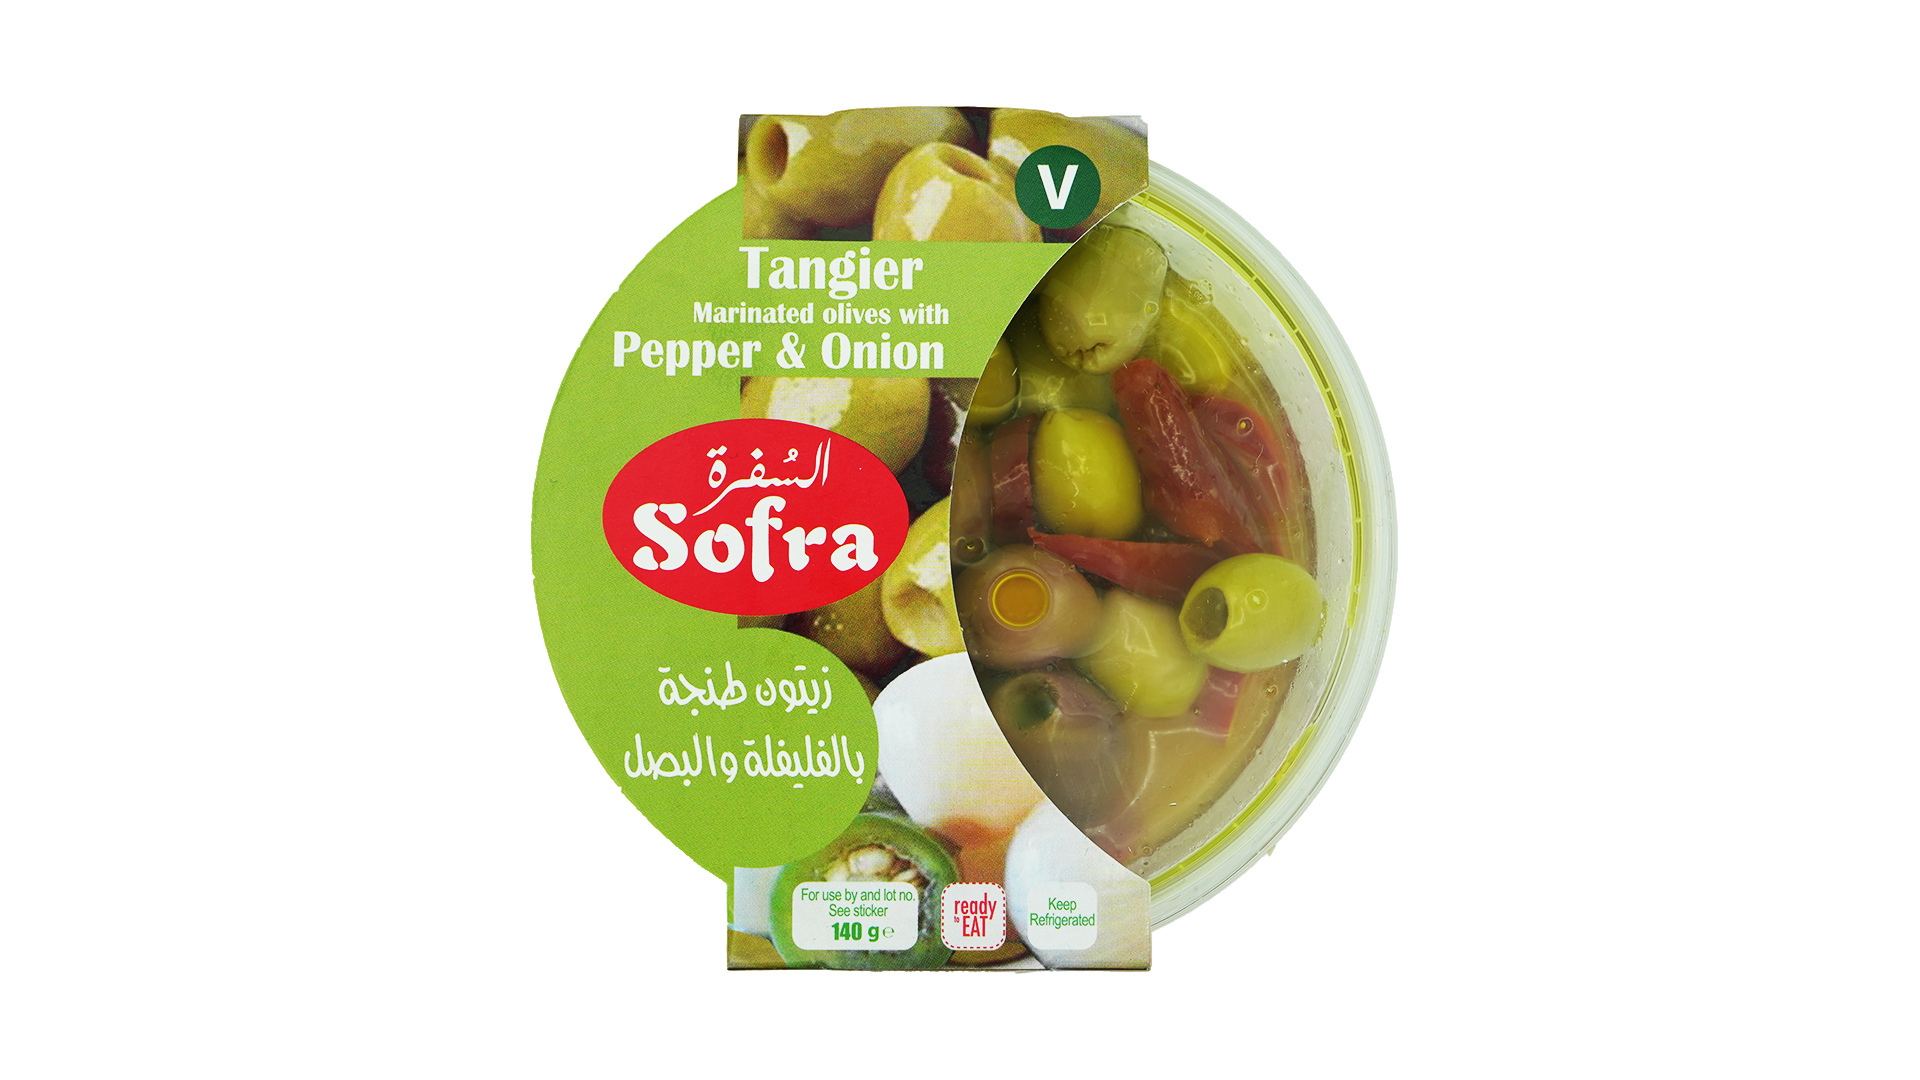 Sofra tangier marinated olives with pepper and onion 140g 1